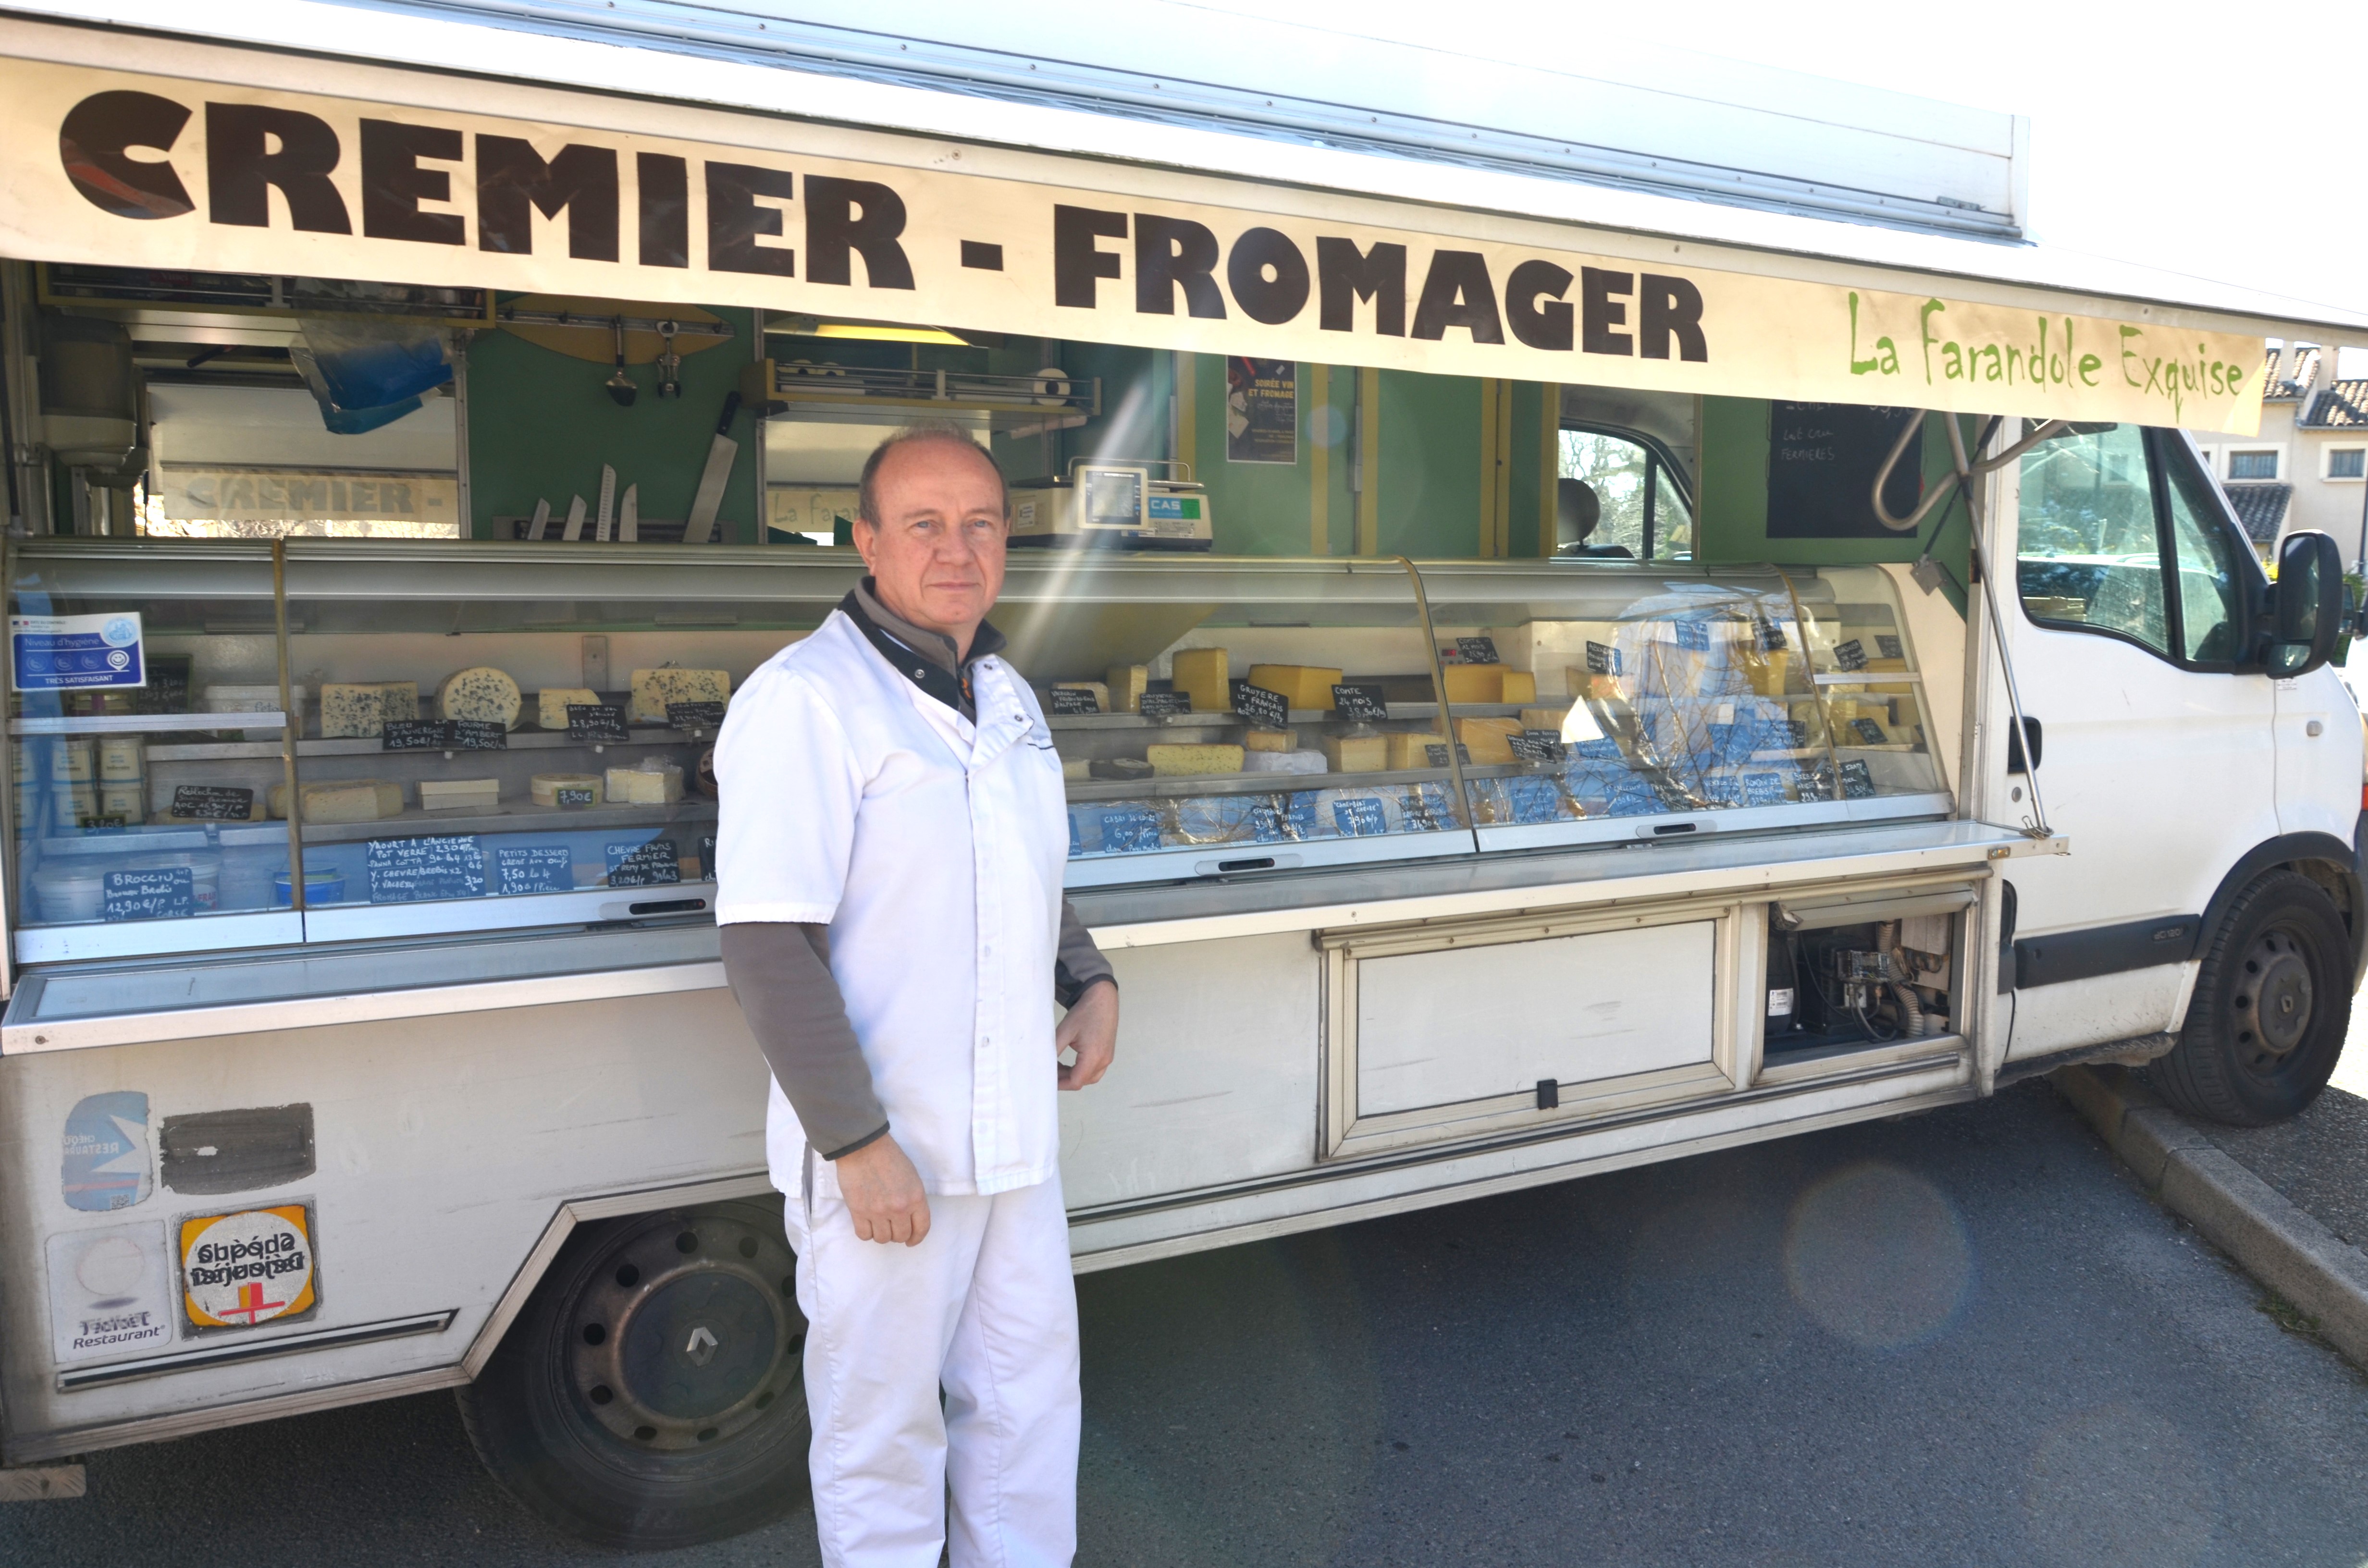 marché fromagerie.JPG